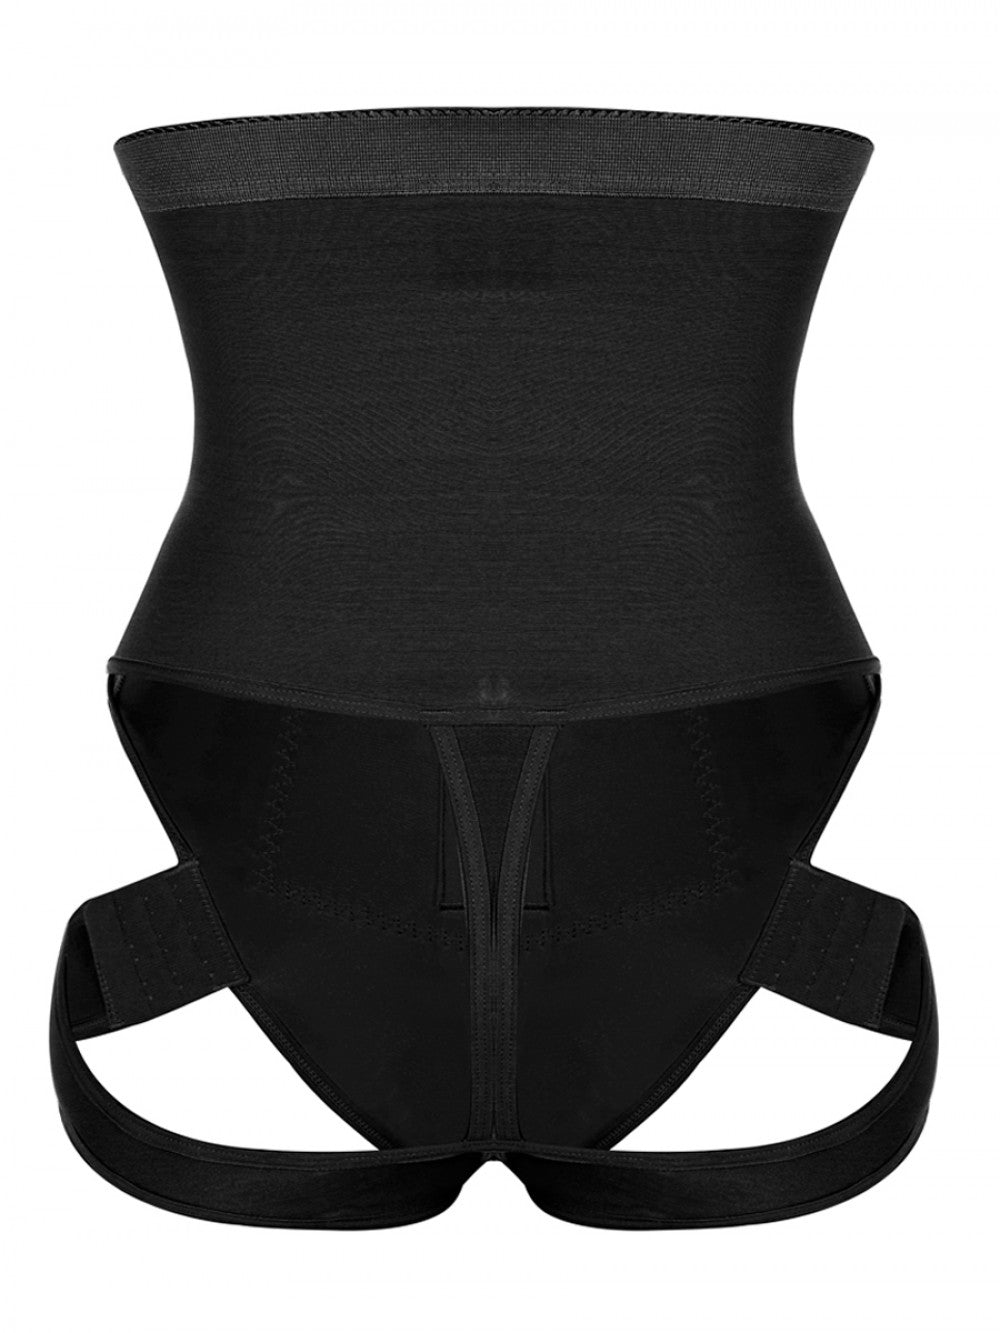 HIGH WAIST BUTT LIFT BODY GIRDLE WITH THIGH SUPPORT STRAPS